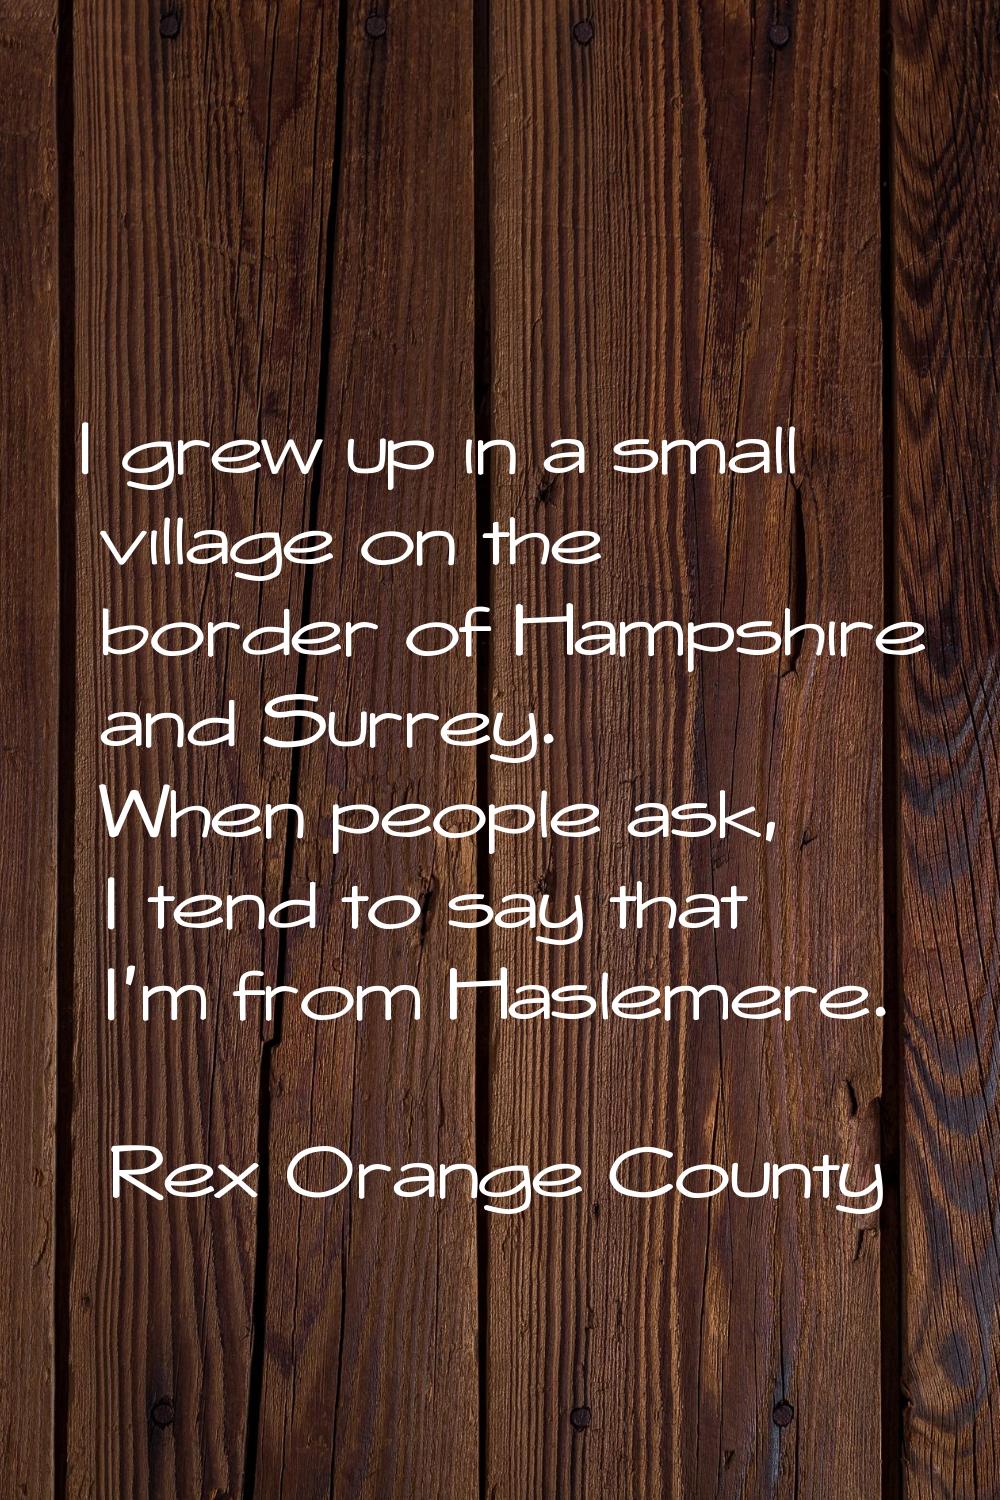 I grew up in a small village on the border of Hampshire and Surrey. When people ask, I tend to say 